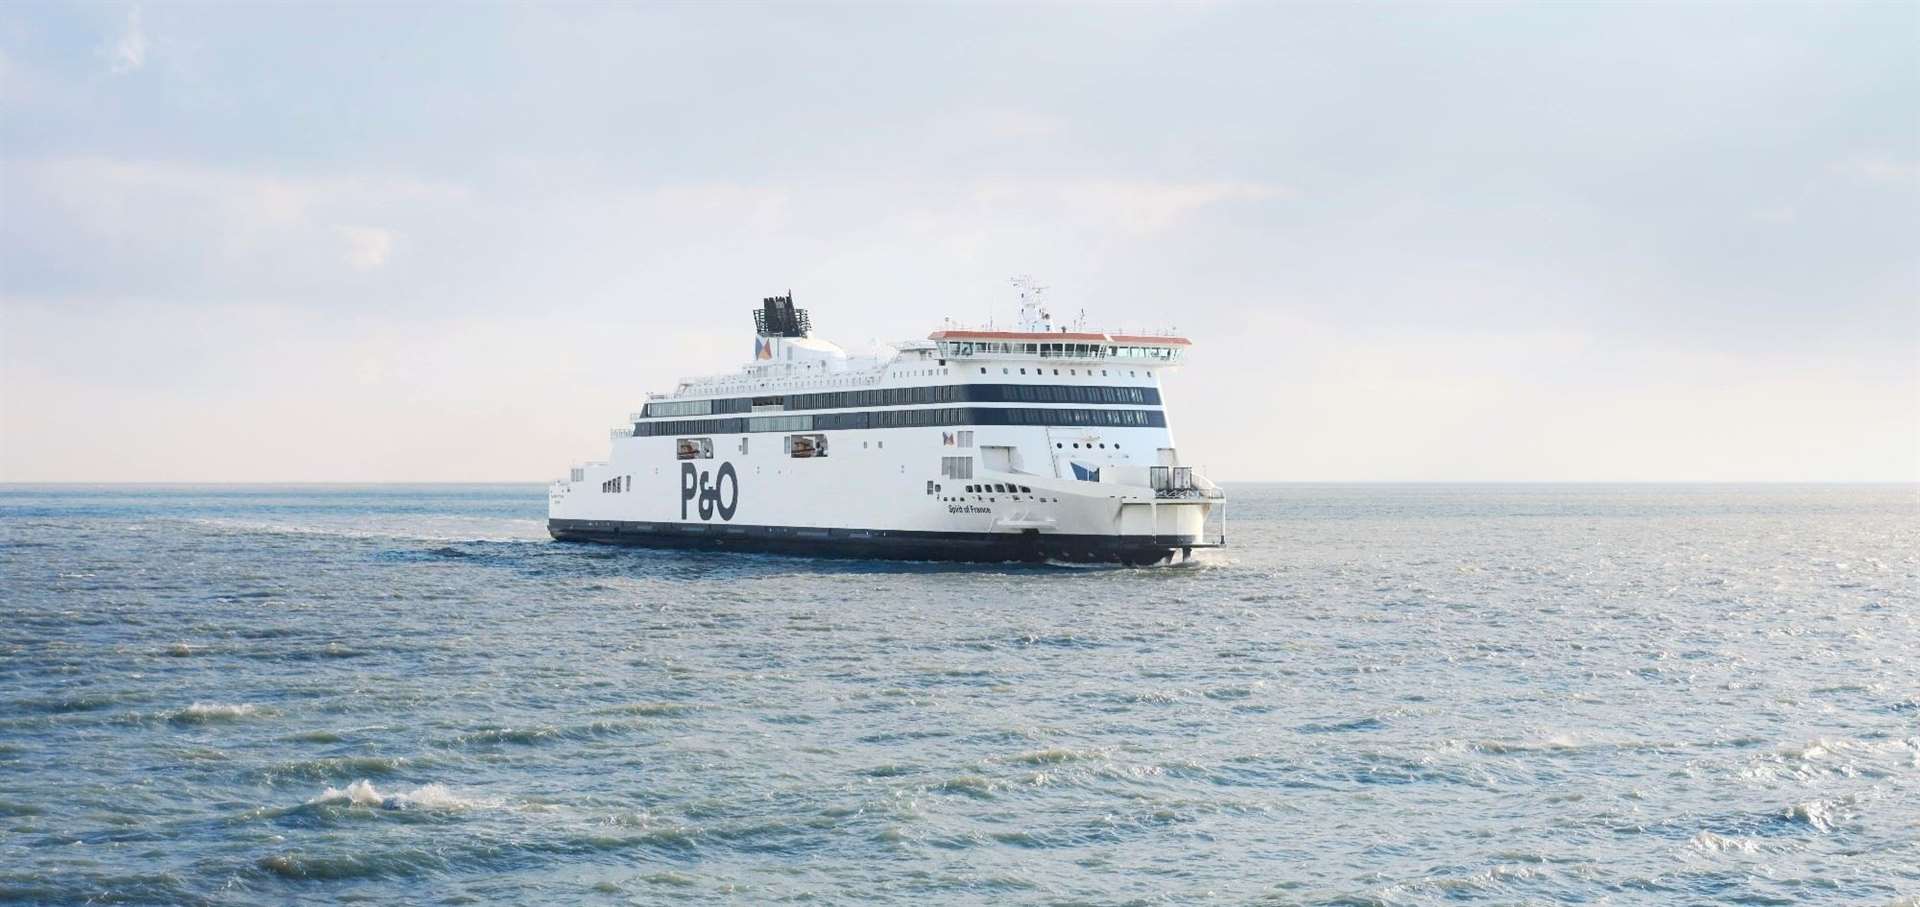 P&O Ferries has announced 1,100 jobs will go - 614 of them from Dover